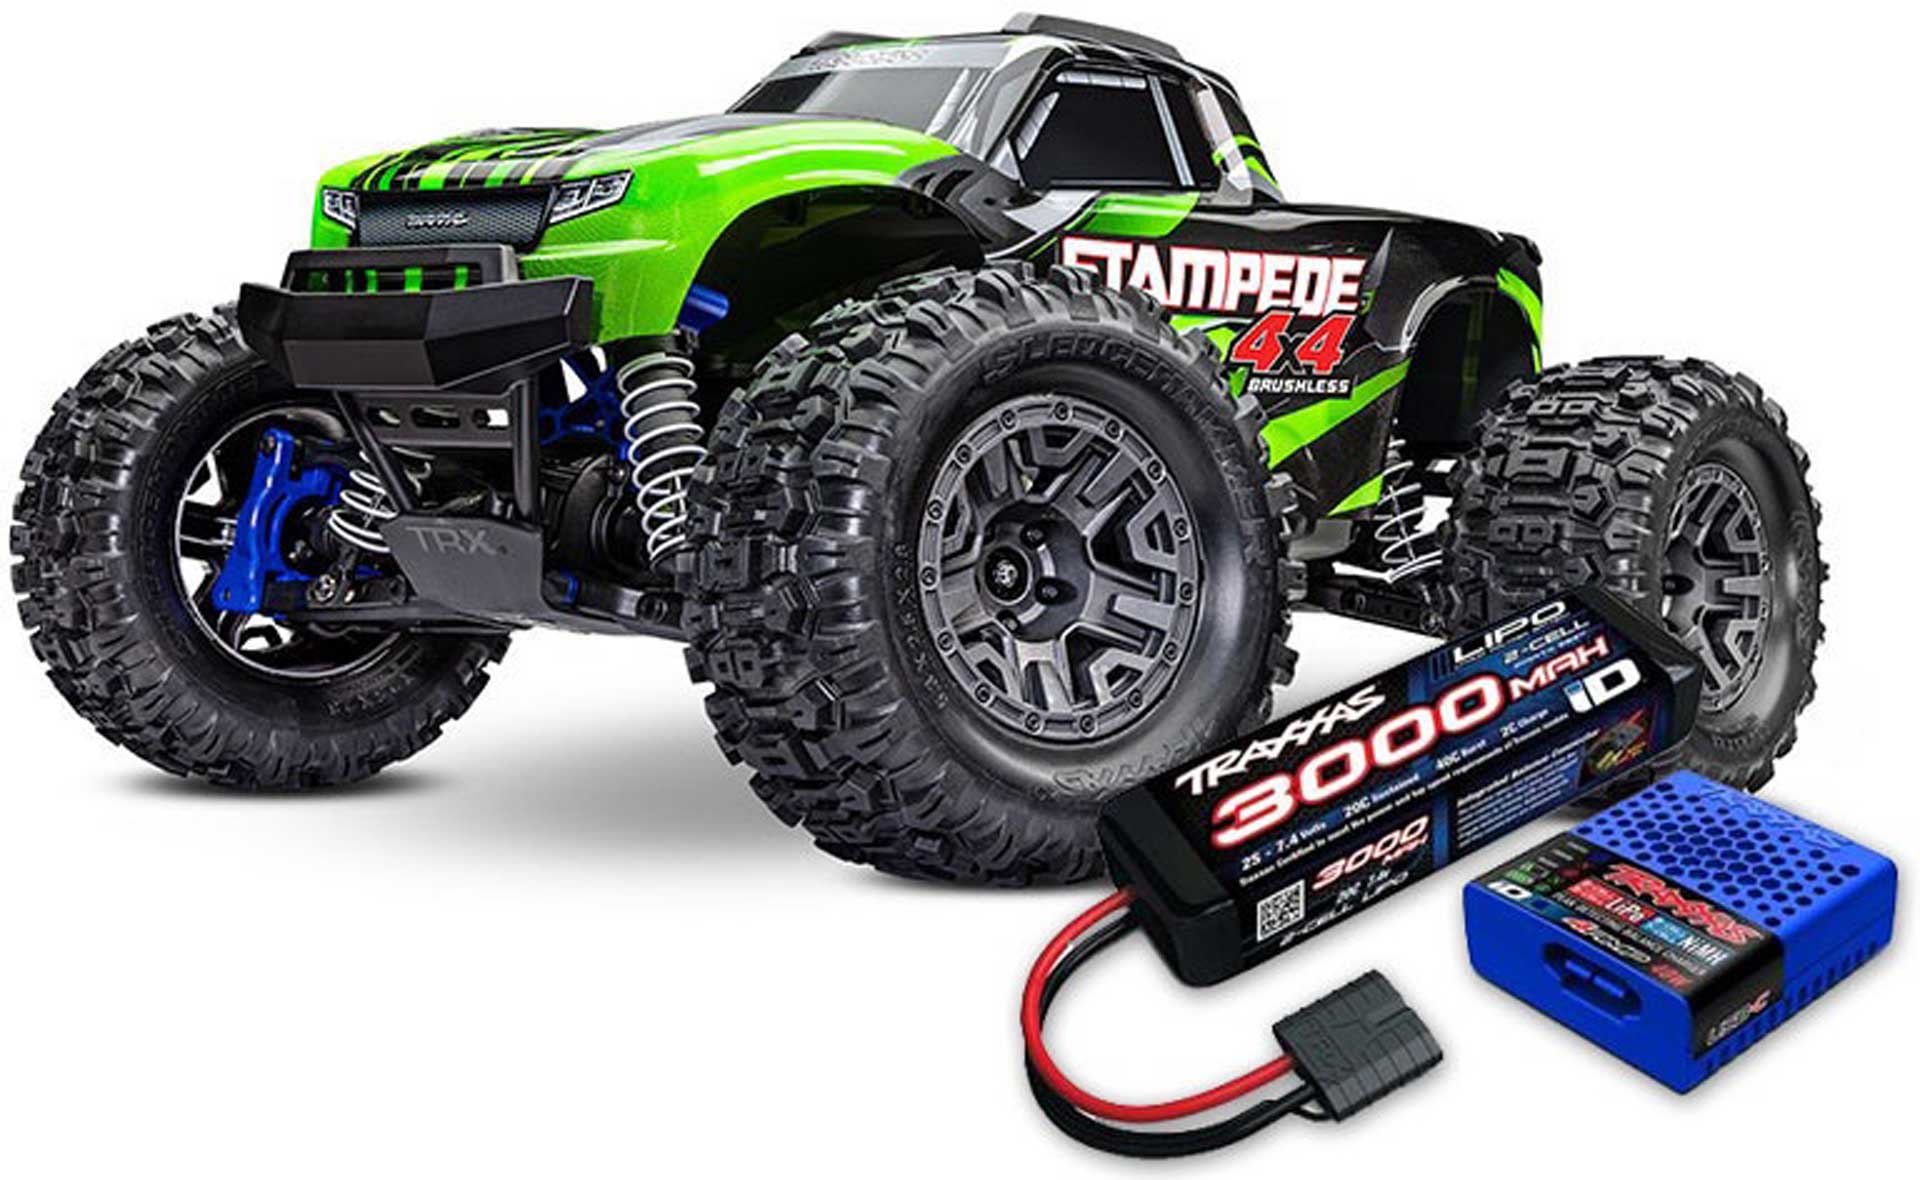 TRAXXAS STAMPEDE 4X4 BL-2S GREEN 1/10 MONSTER TRUCK RTR BL-2S SET WITH FREE LIPO BATTE